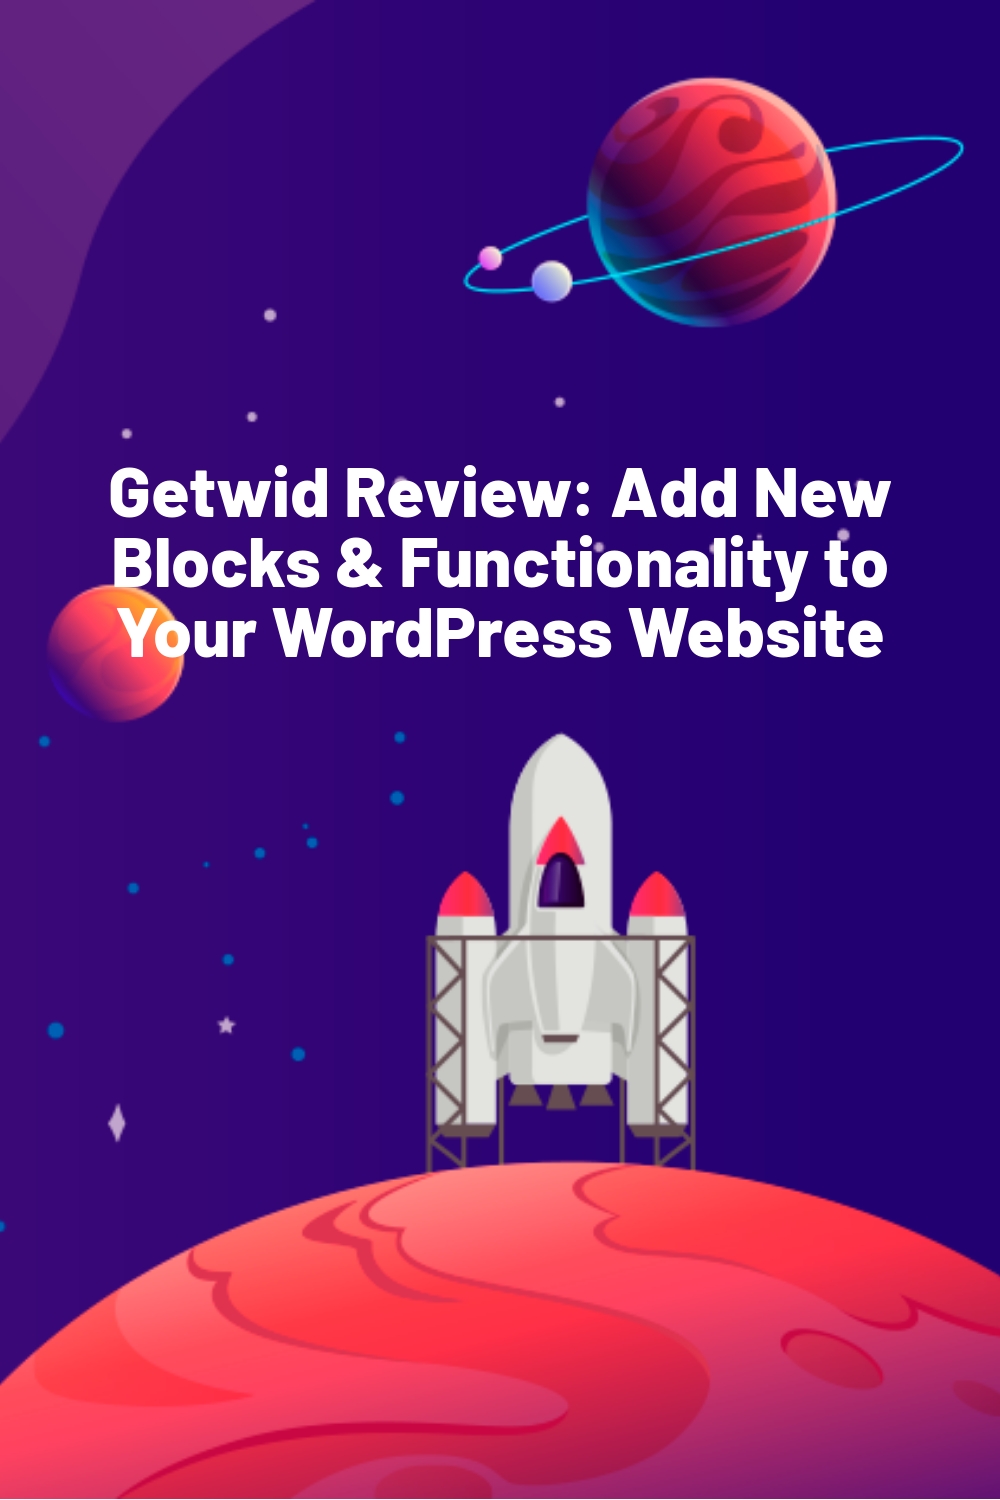 Getwid Review: Add New Blocks & Functionality to Your WordPress Website